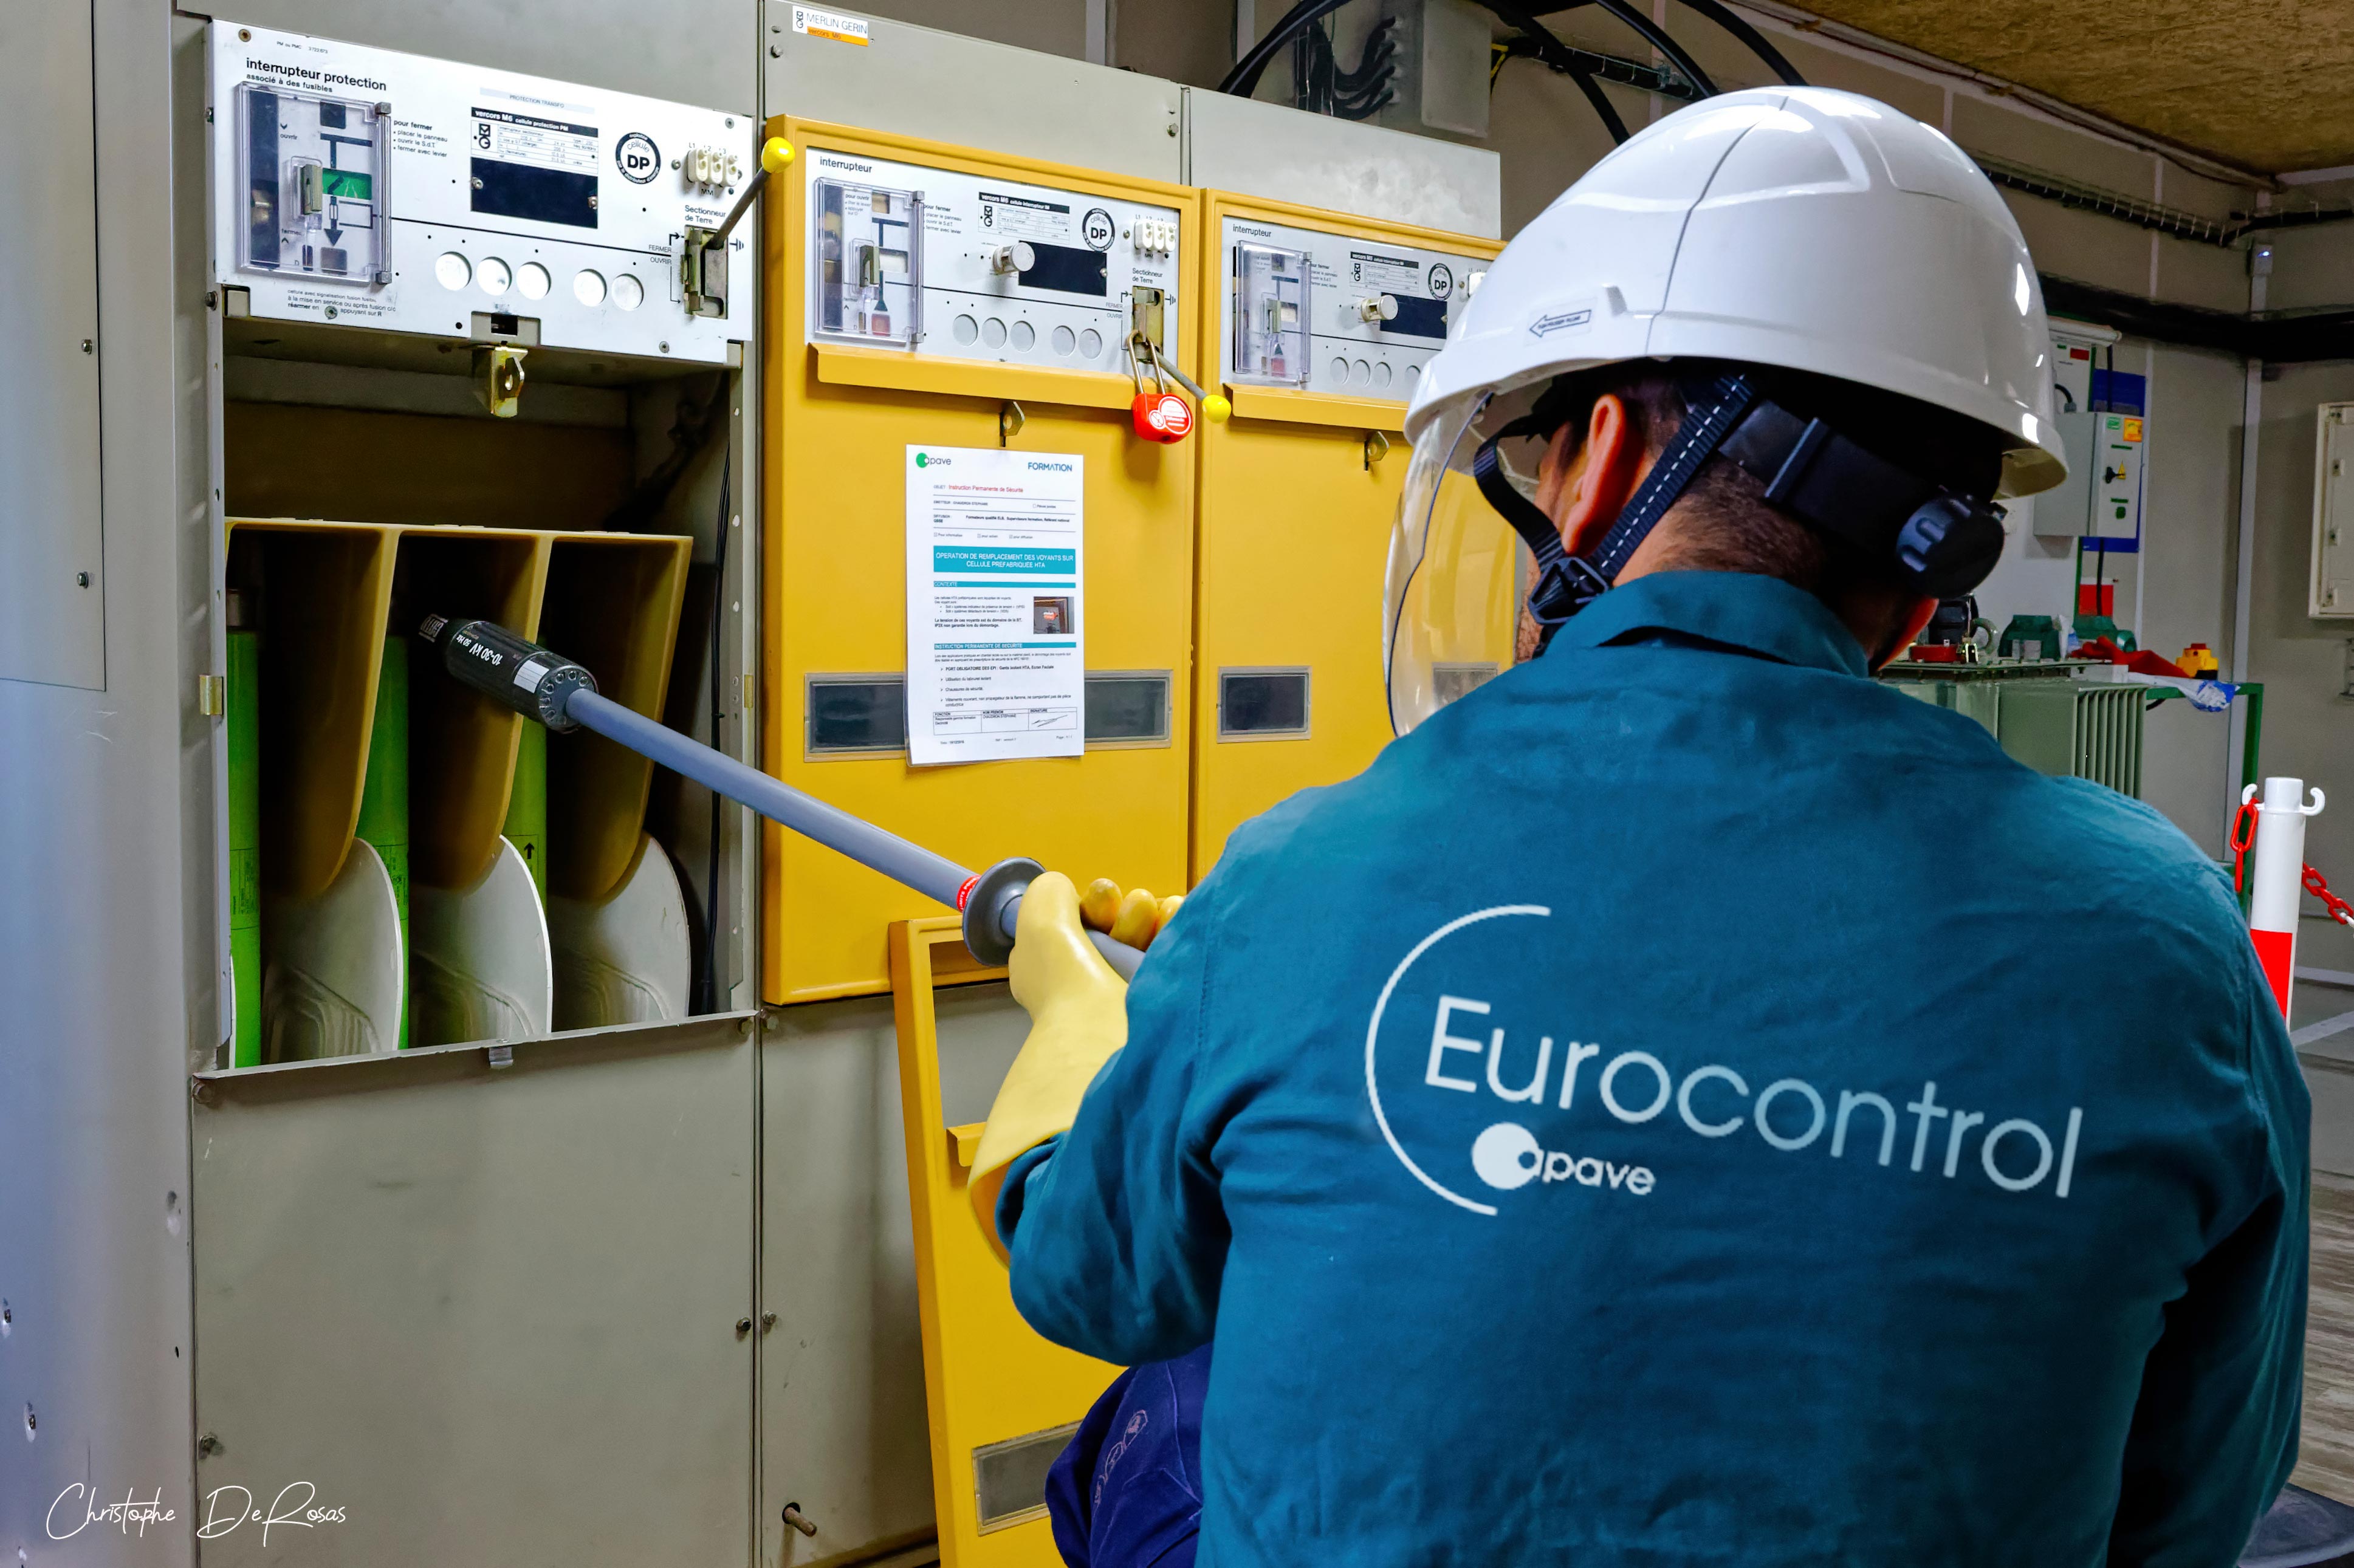 Eurocontrol employee conducting an inspection of an electrical panel